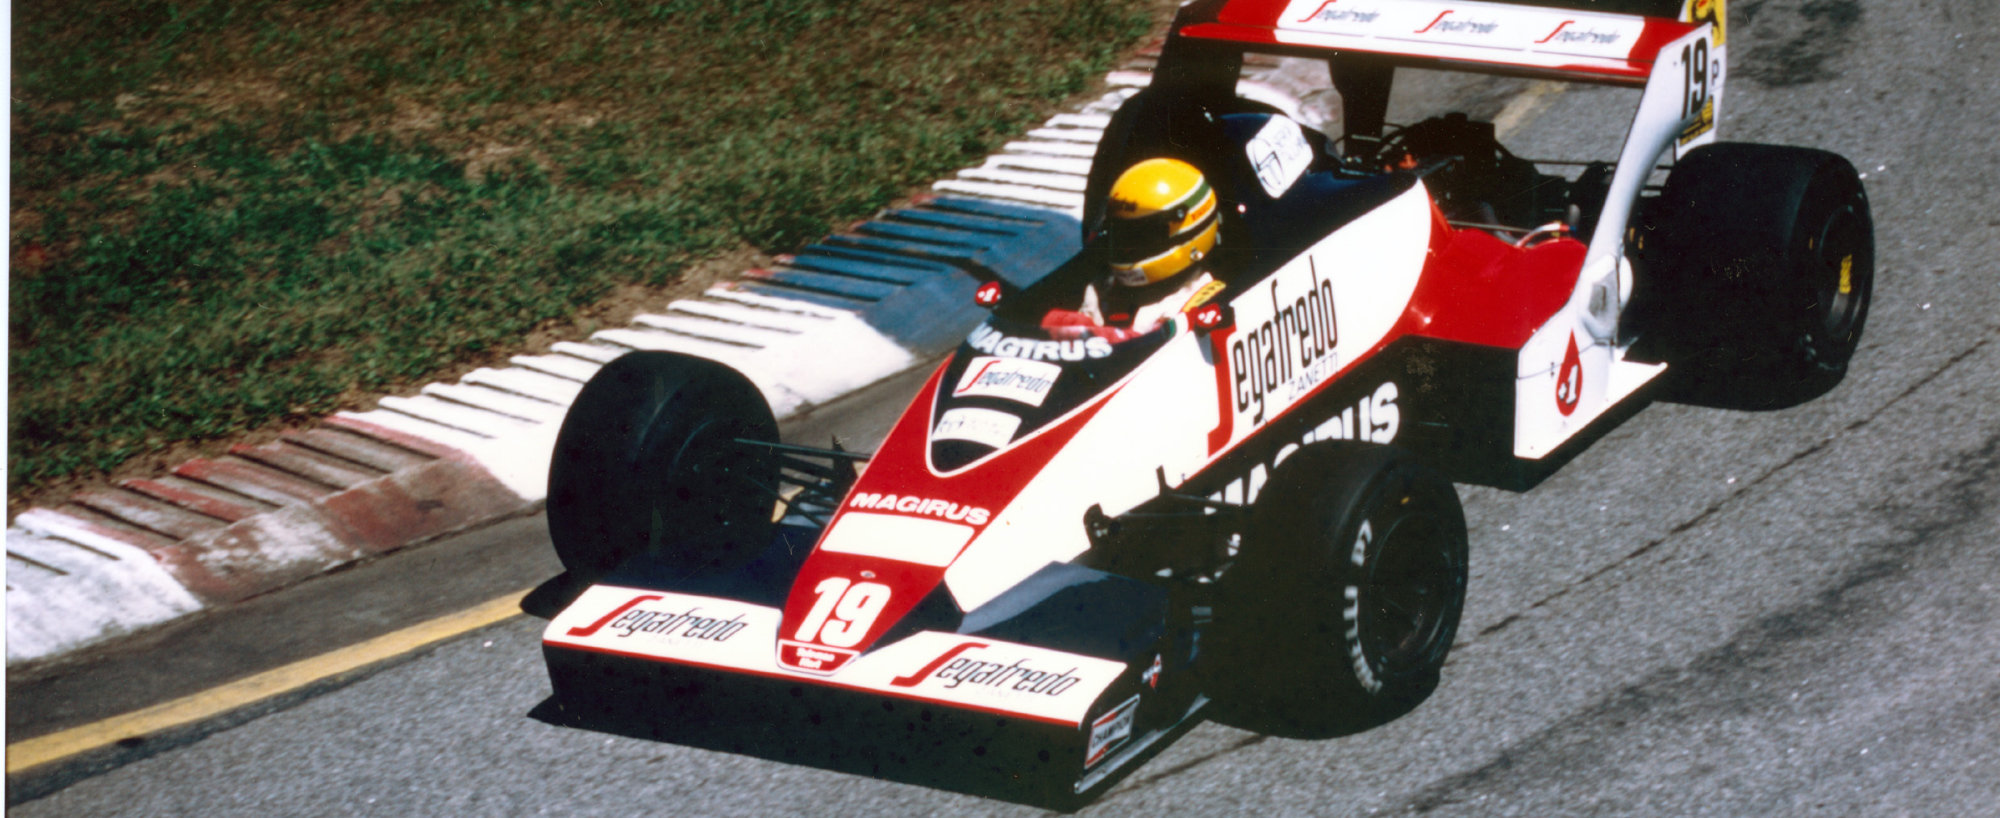 Ayrton Senna's Toleman on track, driven at the Brazilian Grand Prix. Car is going around a corner.